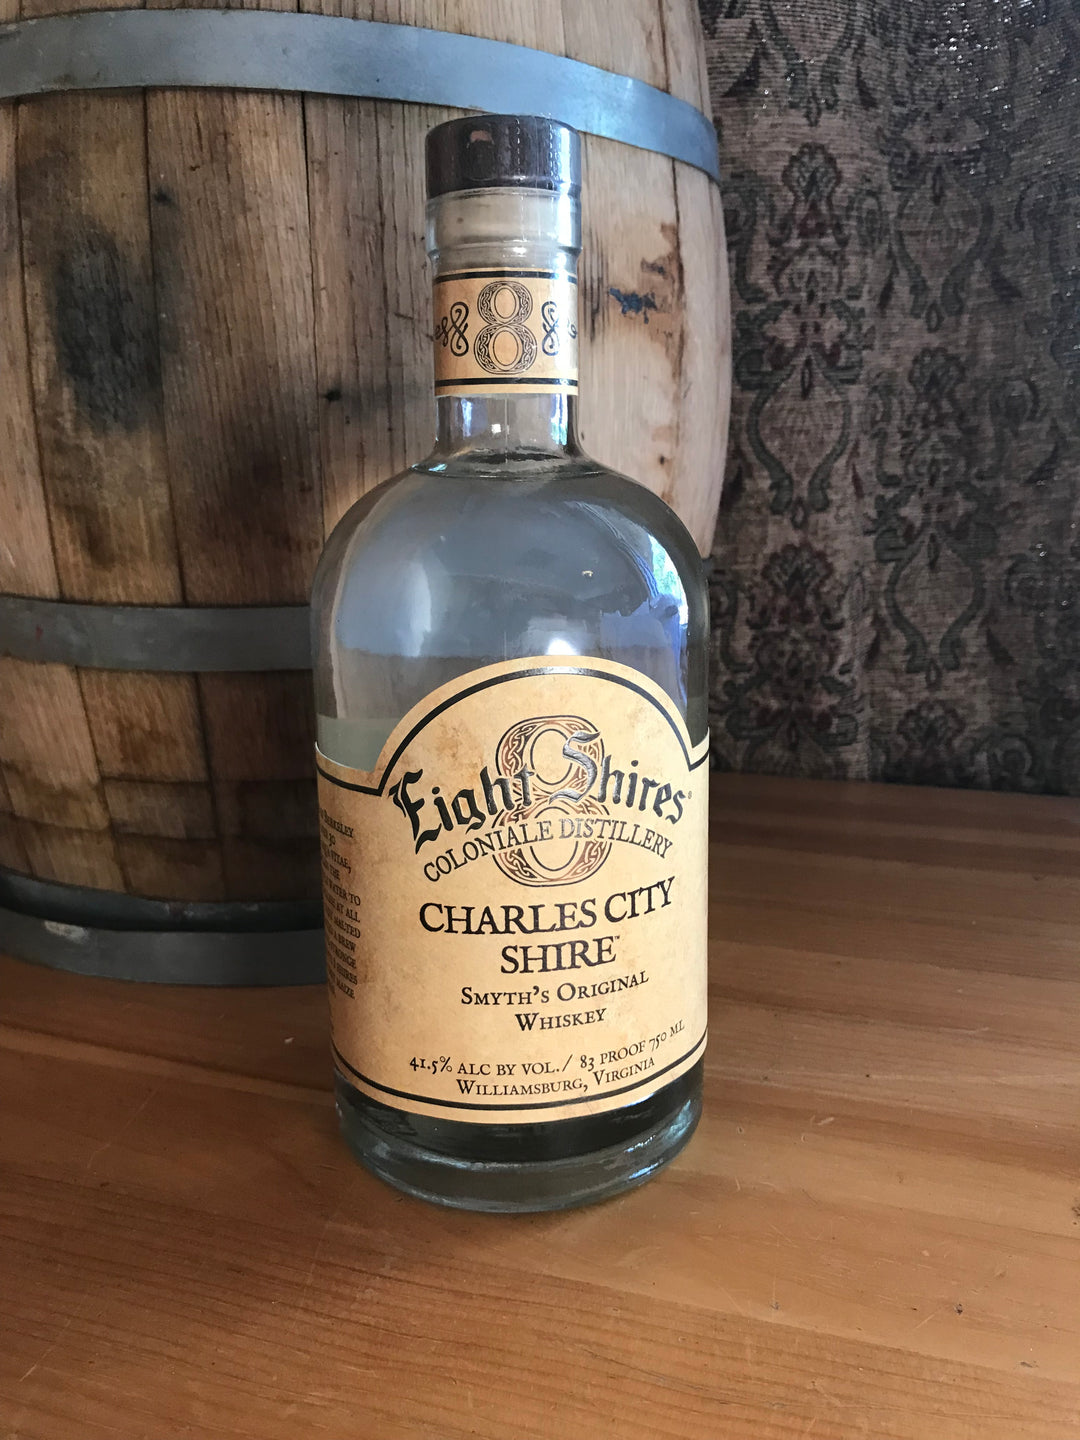 Eight Shires Coloniale - Charles City Shire Smyth's Original Whiskey (White)